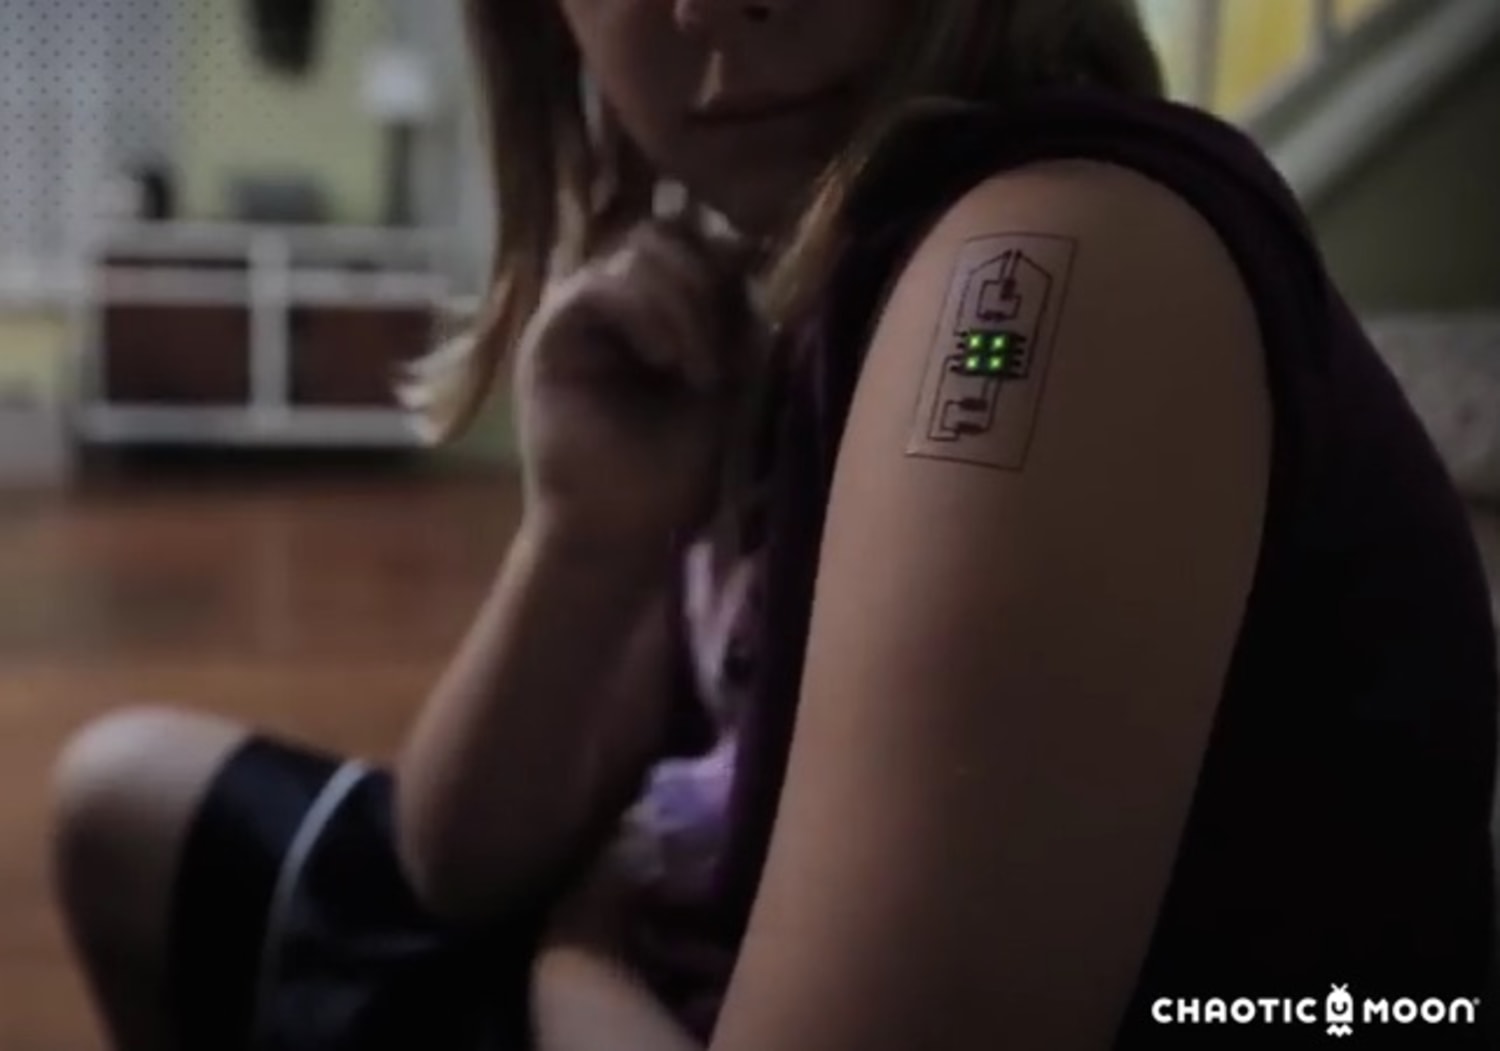 Biometric Tattoos For Medicine  Chaotic Moon  Feel Desain  your daily  dose of creativity